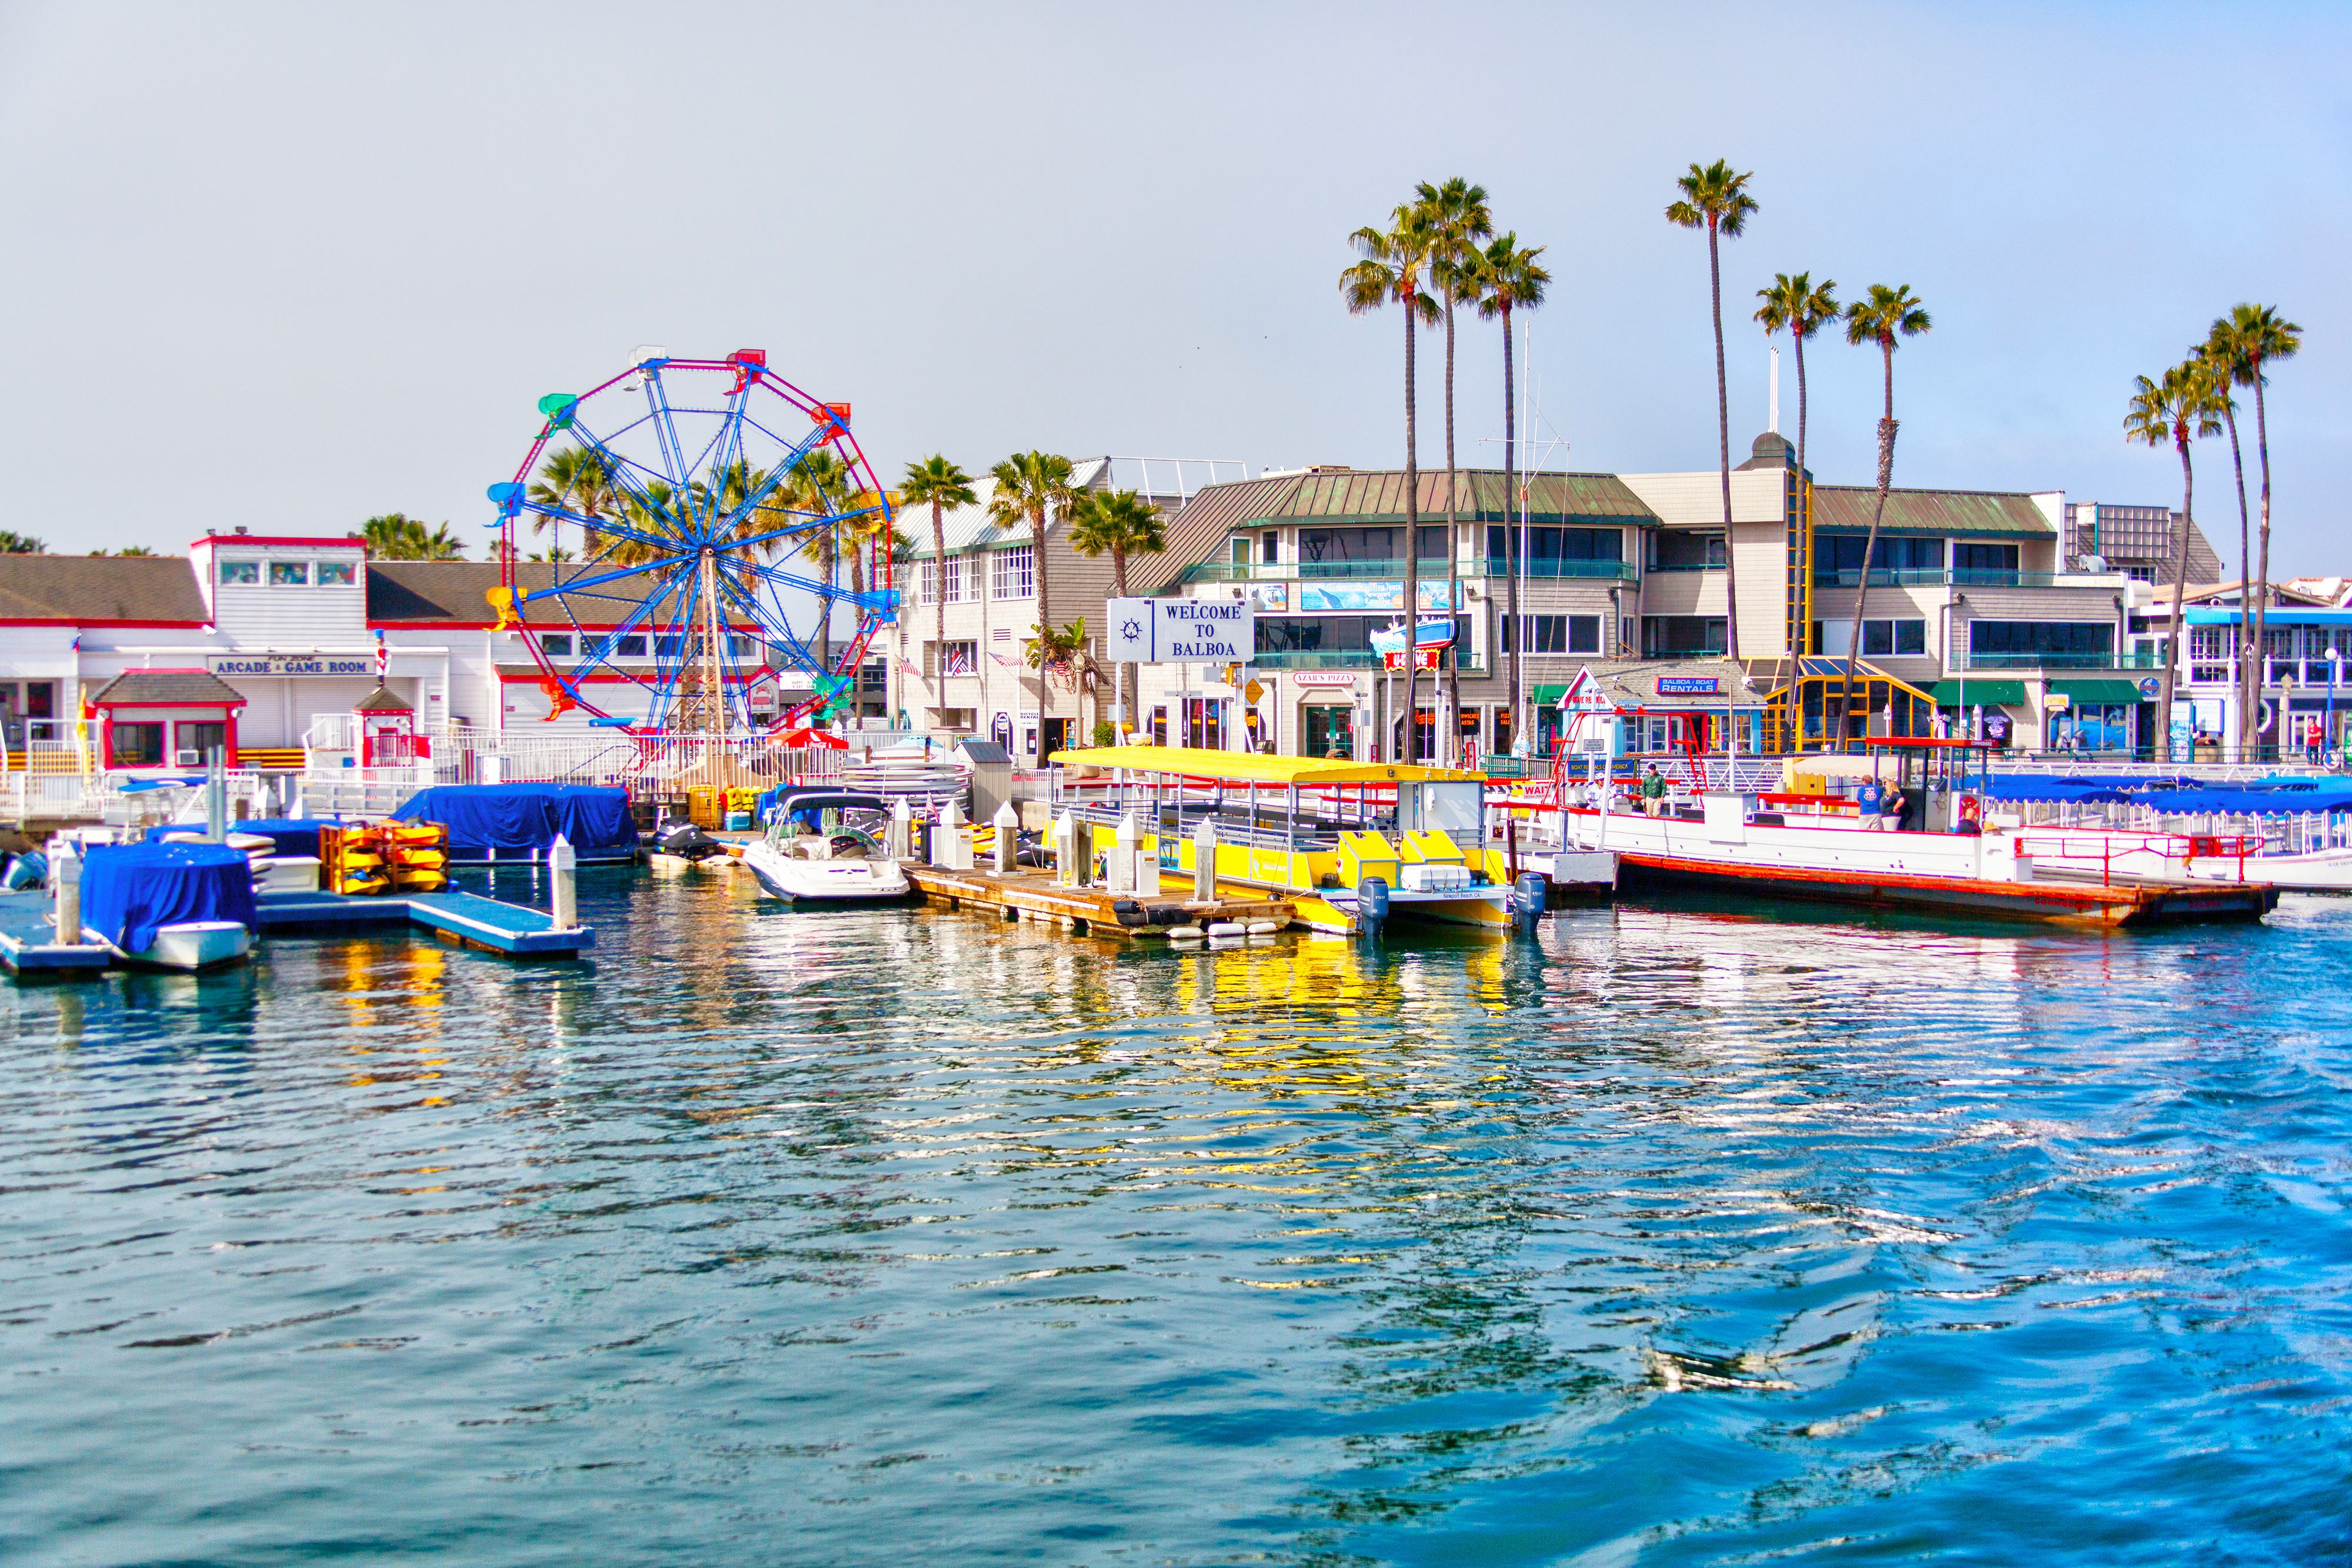 View of a waterfront with boats, a Ferris wheel, and palm trees, depicting a leisure travel destination